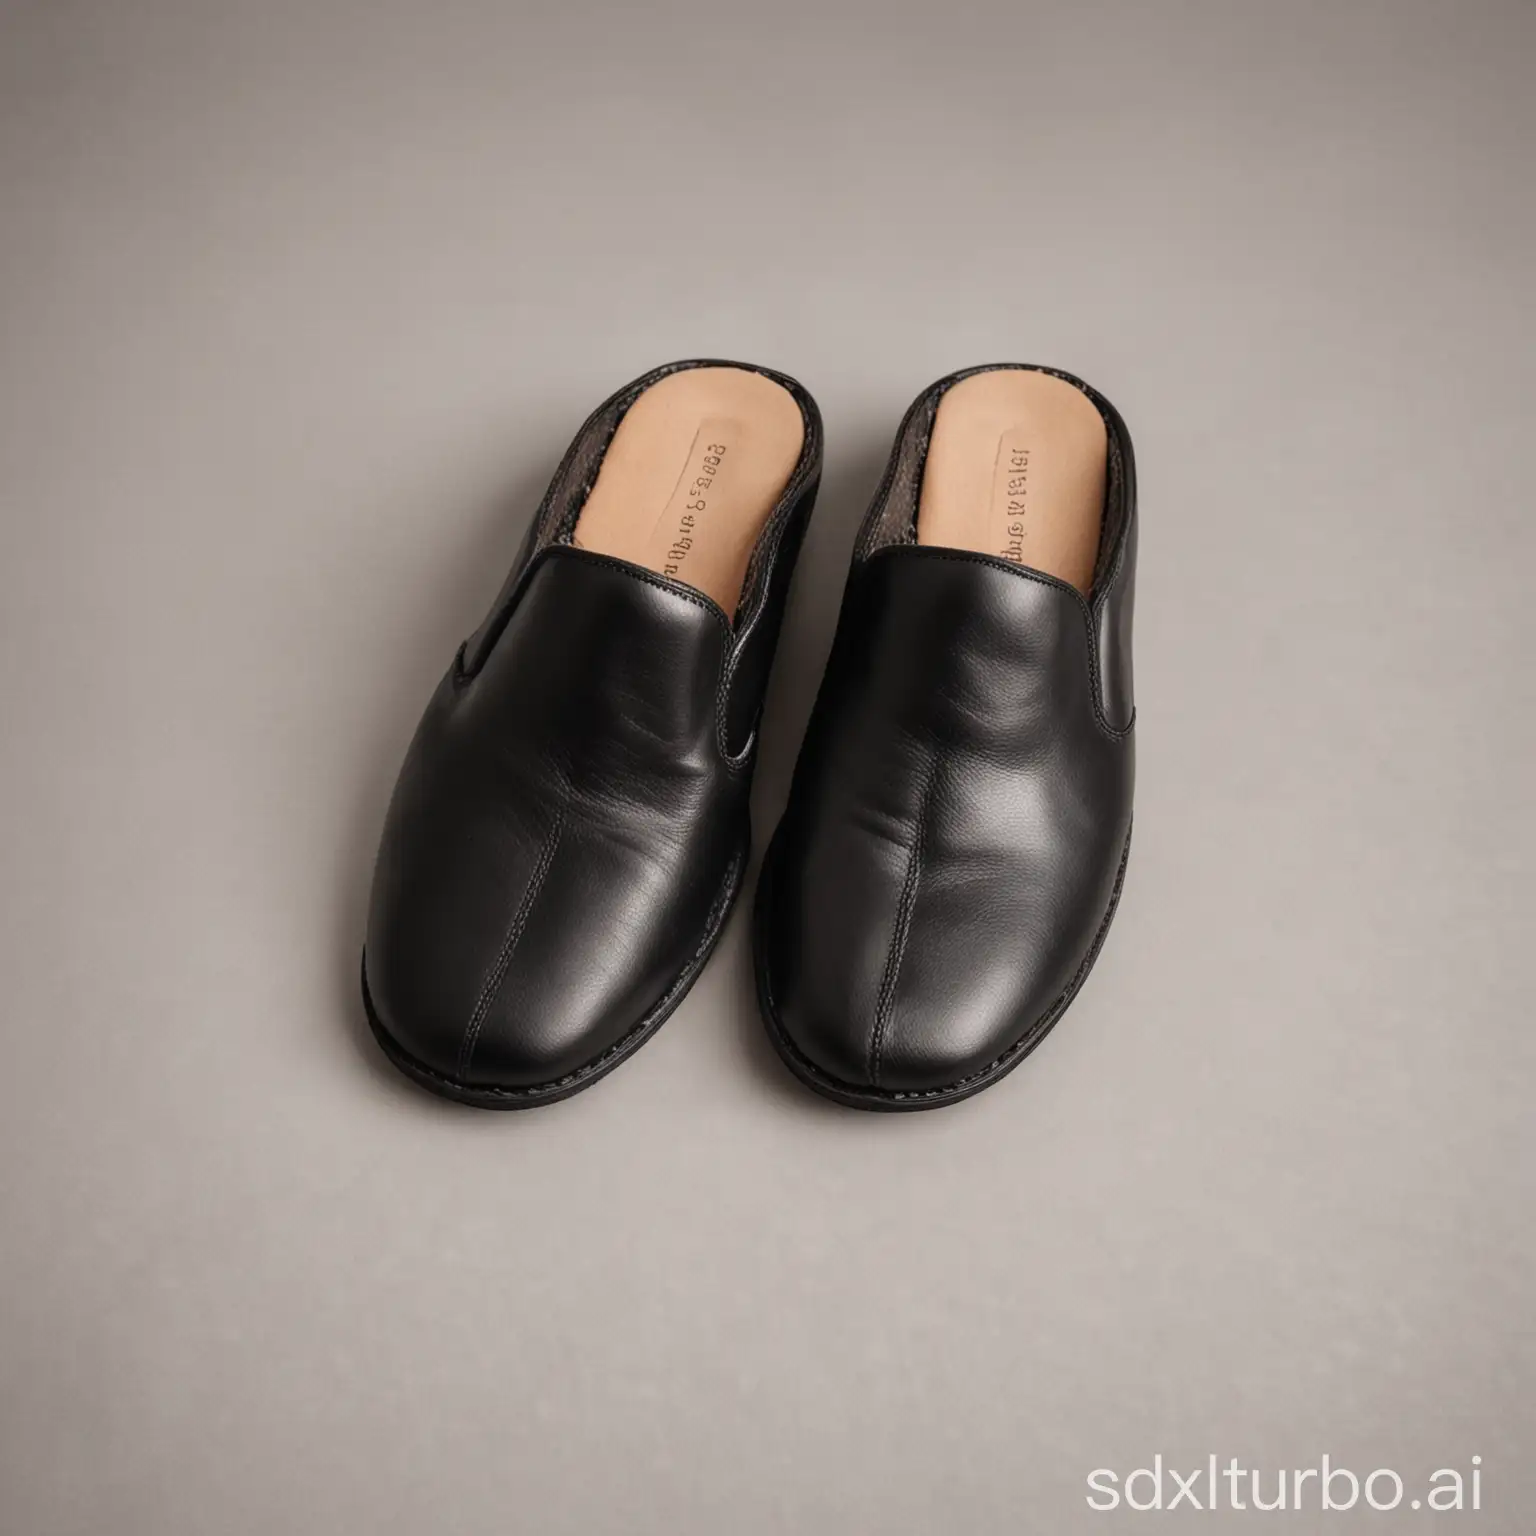 A pair of black leather slippers sit on a white background. The slippers have a sleek, modern design with a cushioned sole and a padded insole.
